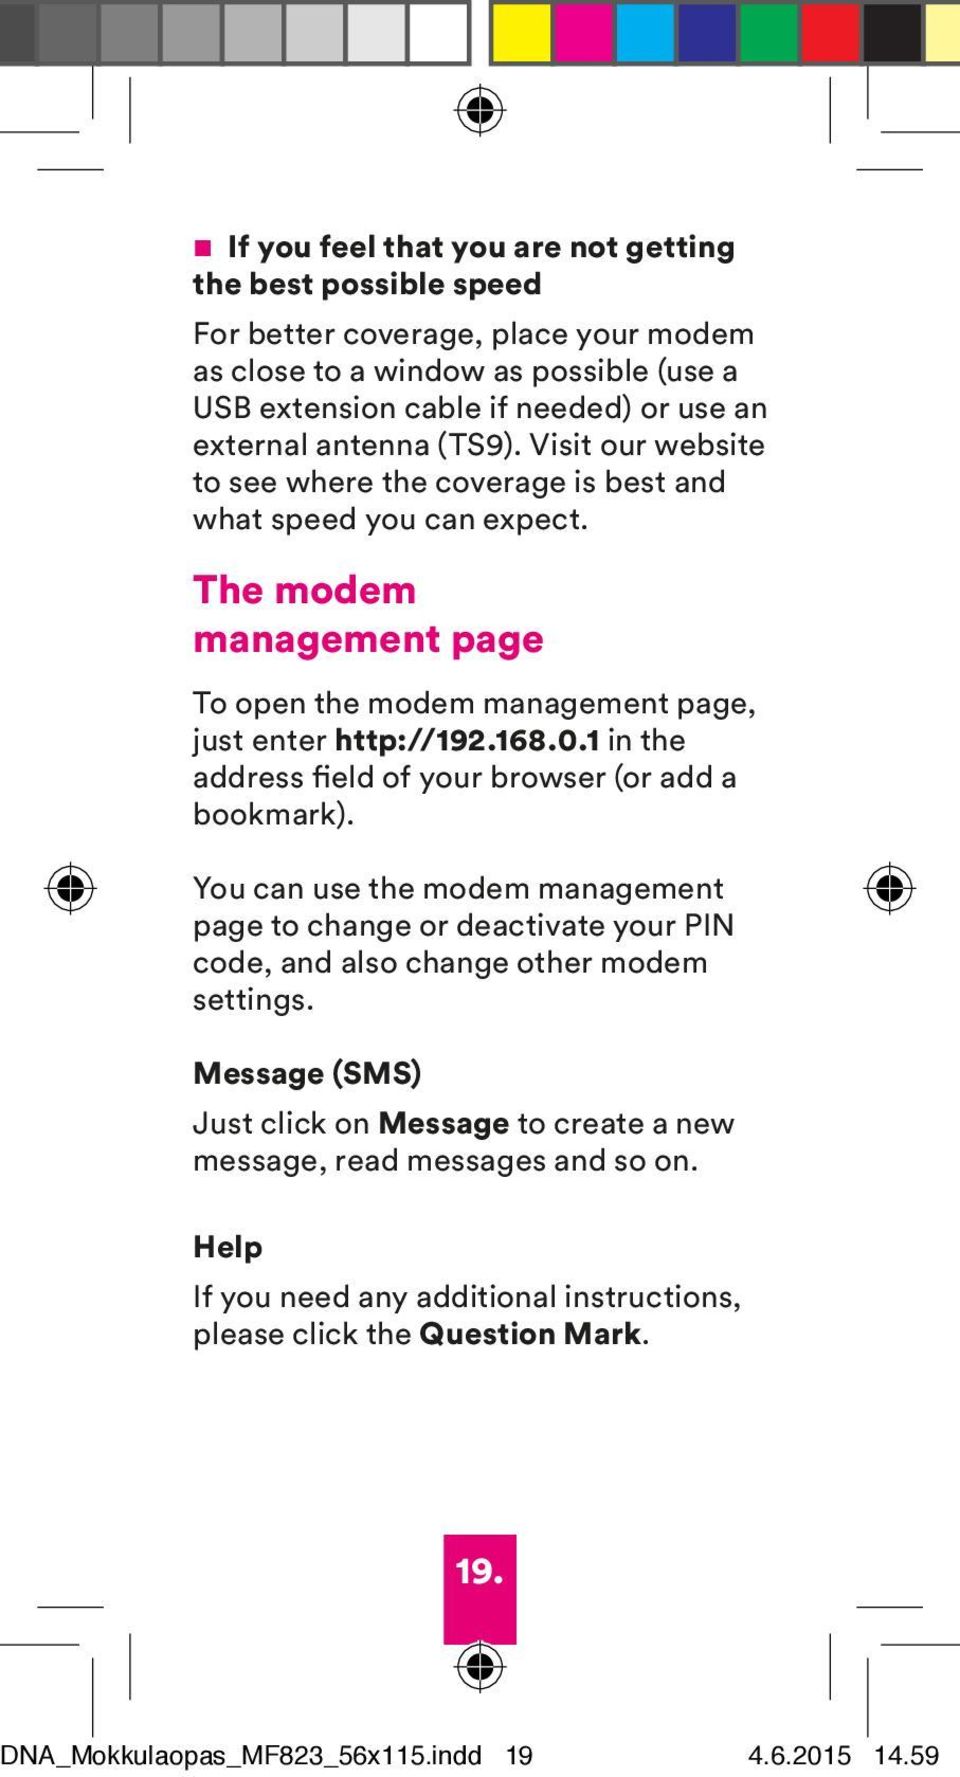 1 in the address field of your browser (or add a bookmark). You can use the modem management page to change or deactivate your PIN code, and also change other modem settings.